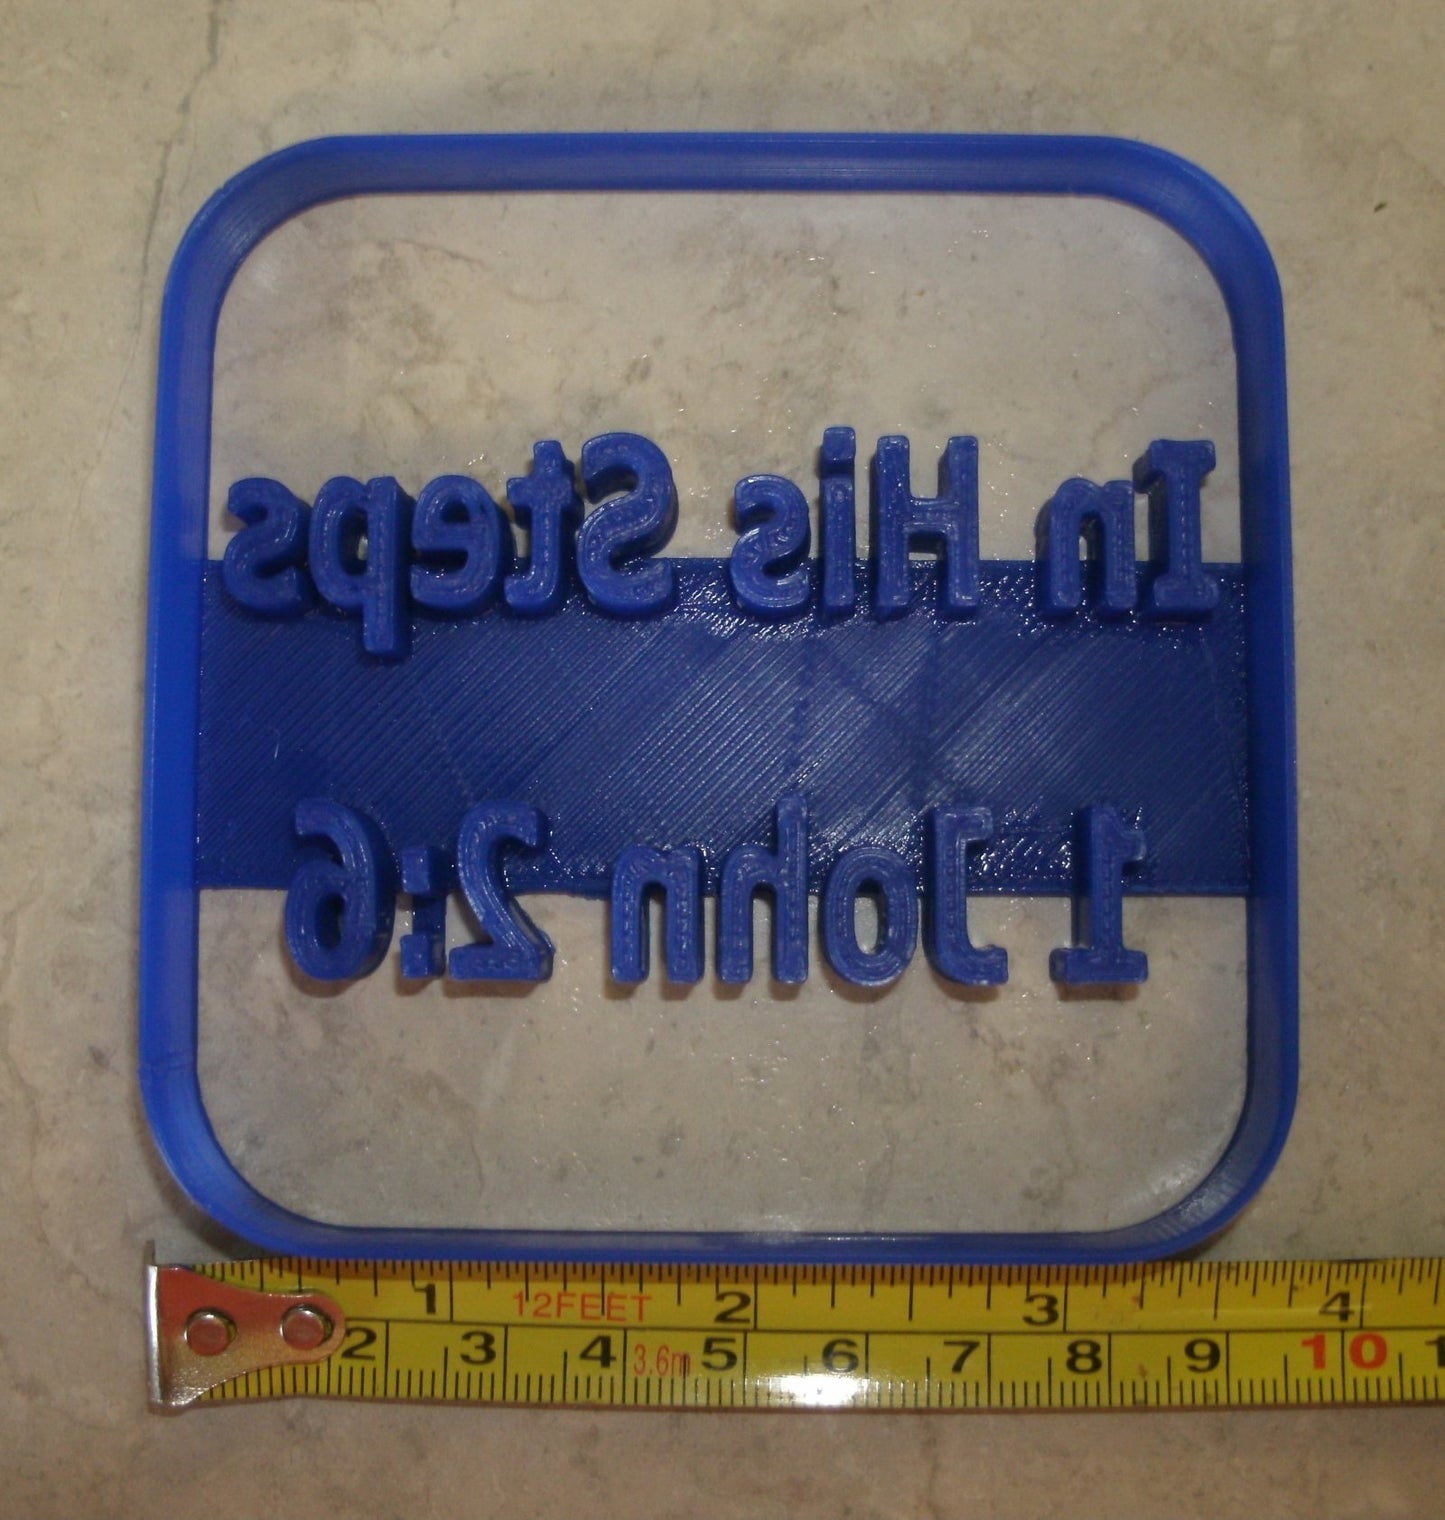 In His Steps 1 John New Testament Bible Verse Cookie Cutter Made in USA PR683